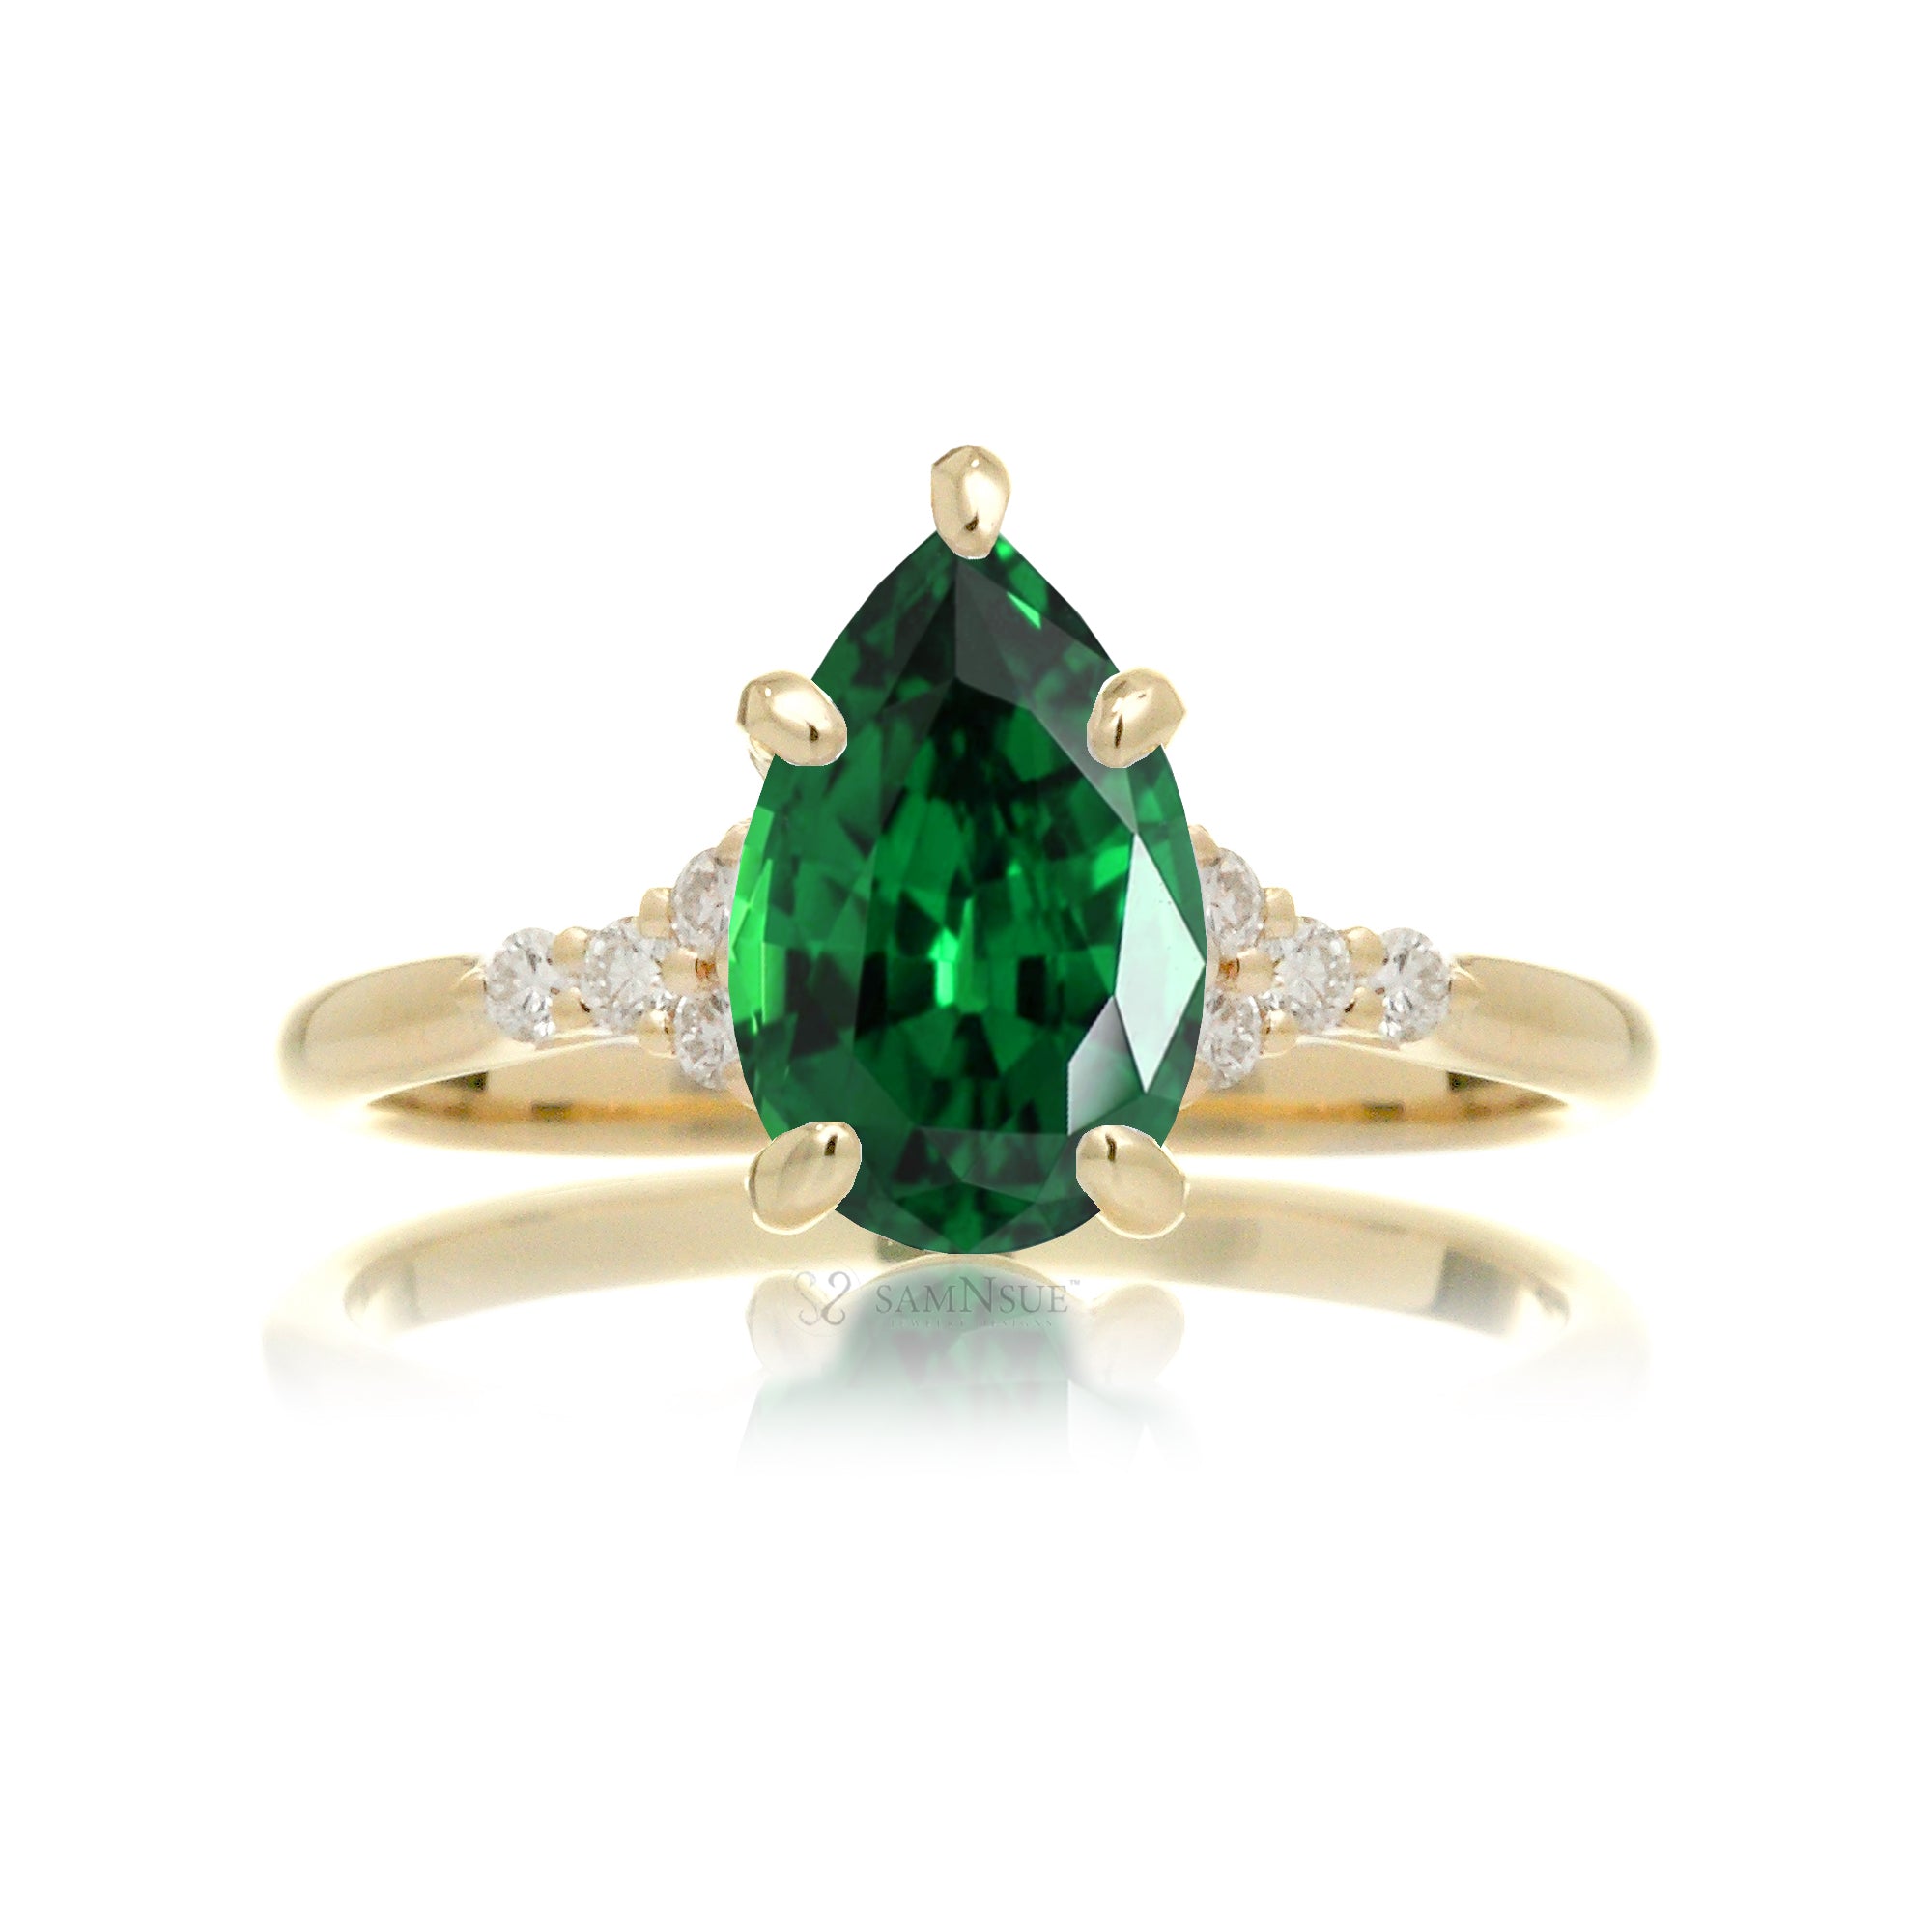 Pear cut emerald and diamond engagement ring in yellow gold - the Chloe lab-grown